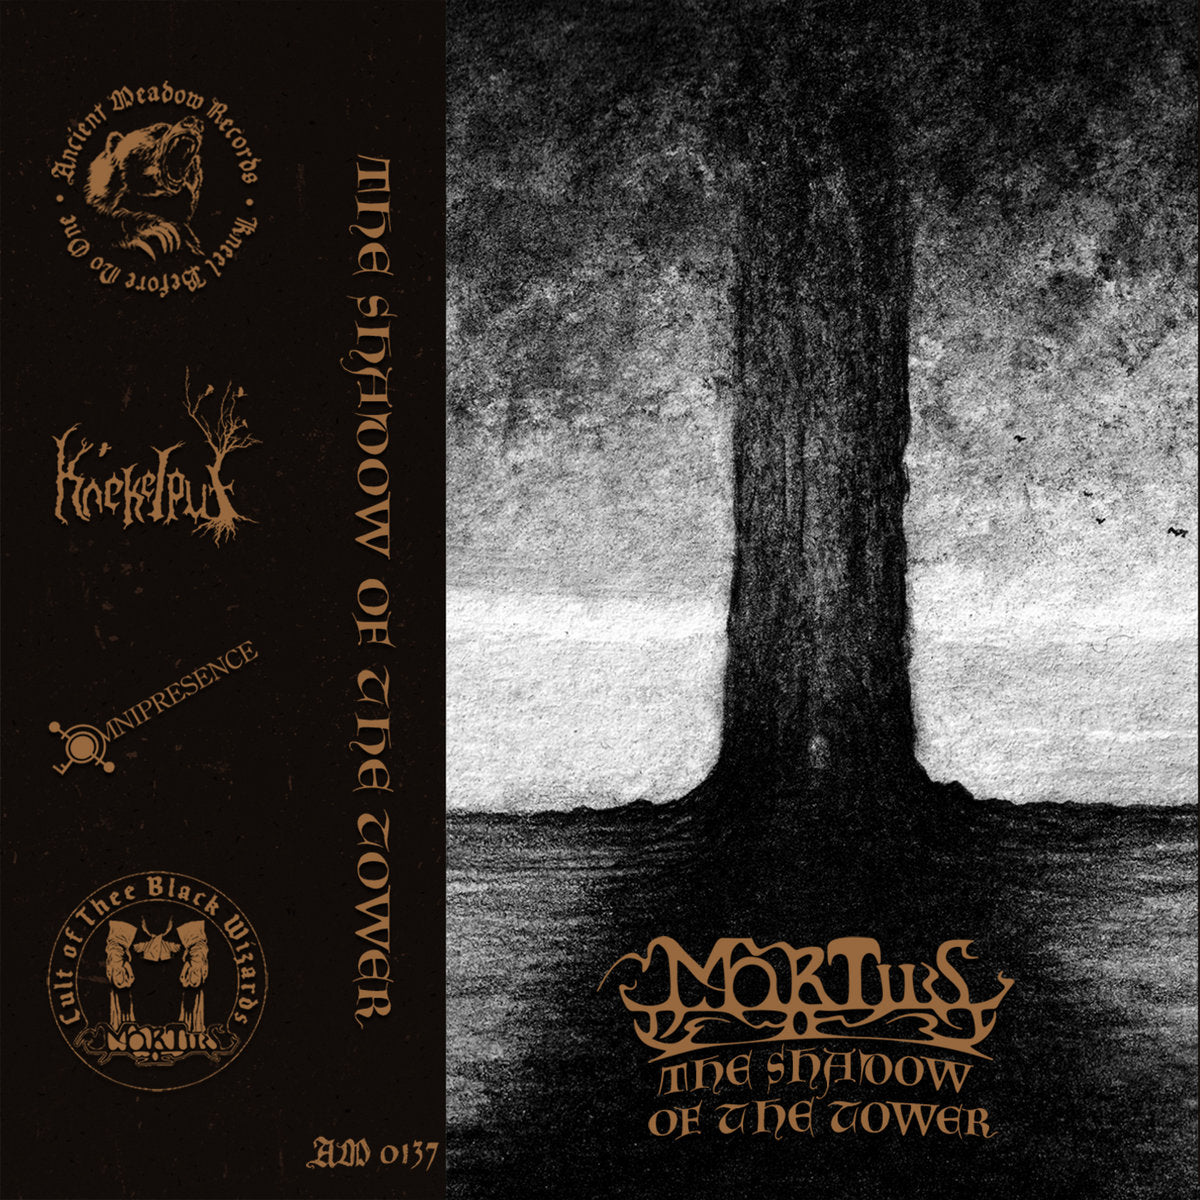 [SOLD OUT] MORTIIS "The Shadow of the Tower" Cassette Tape